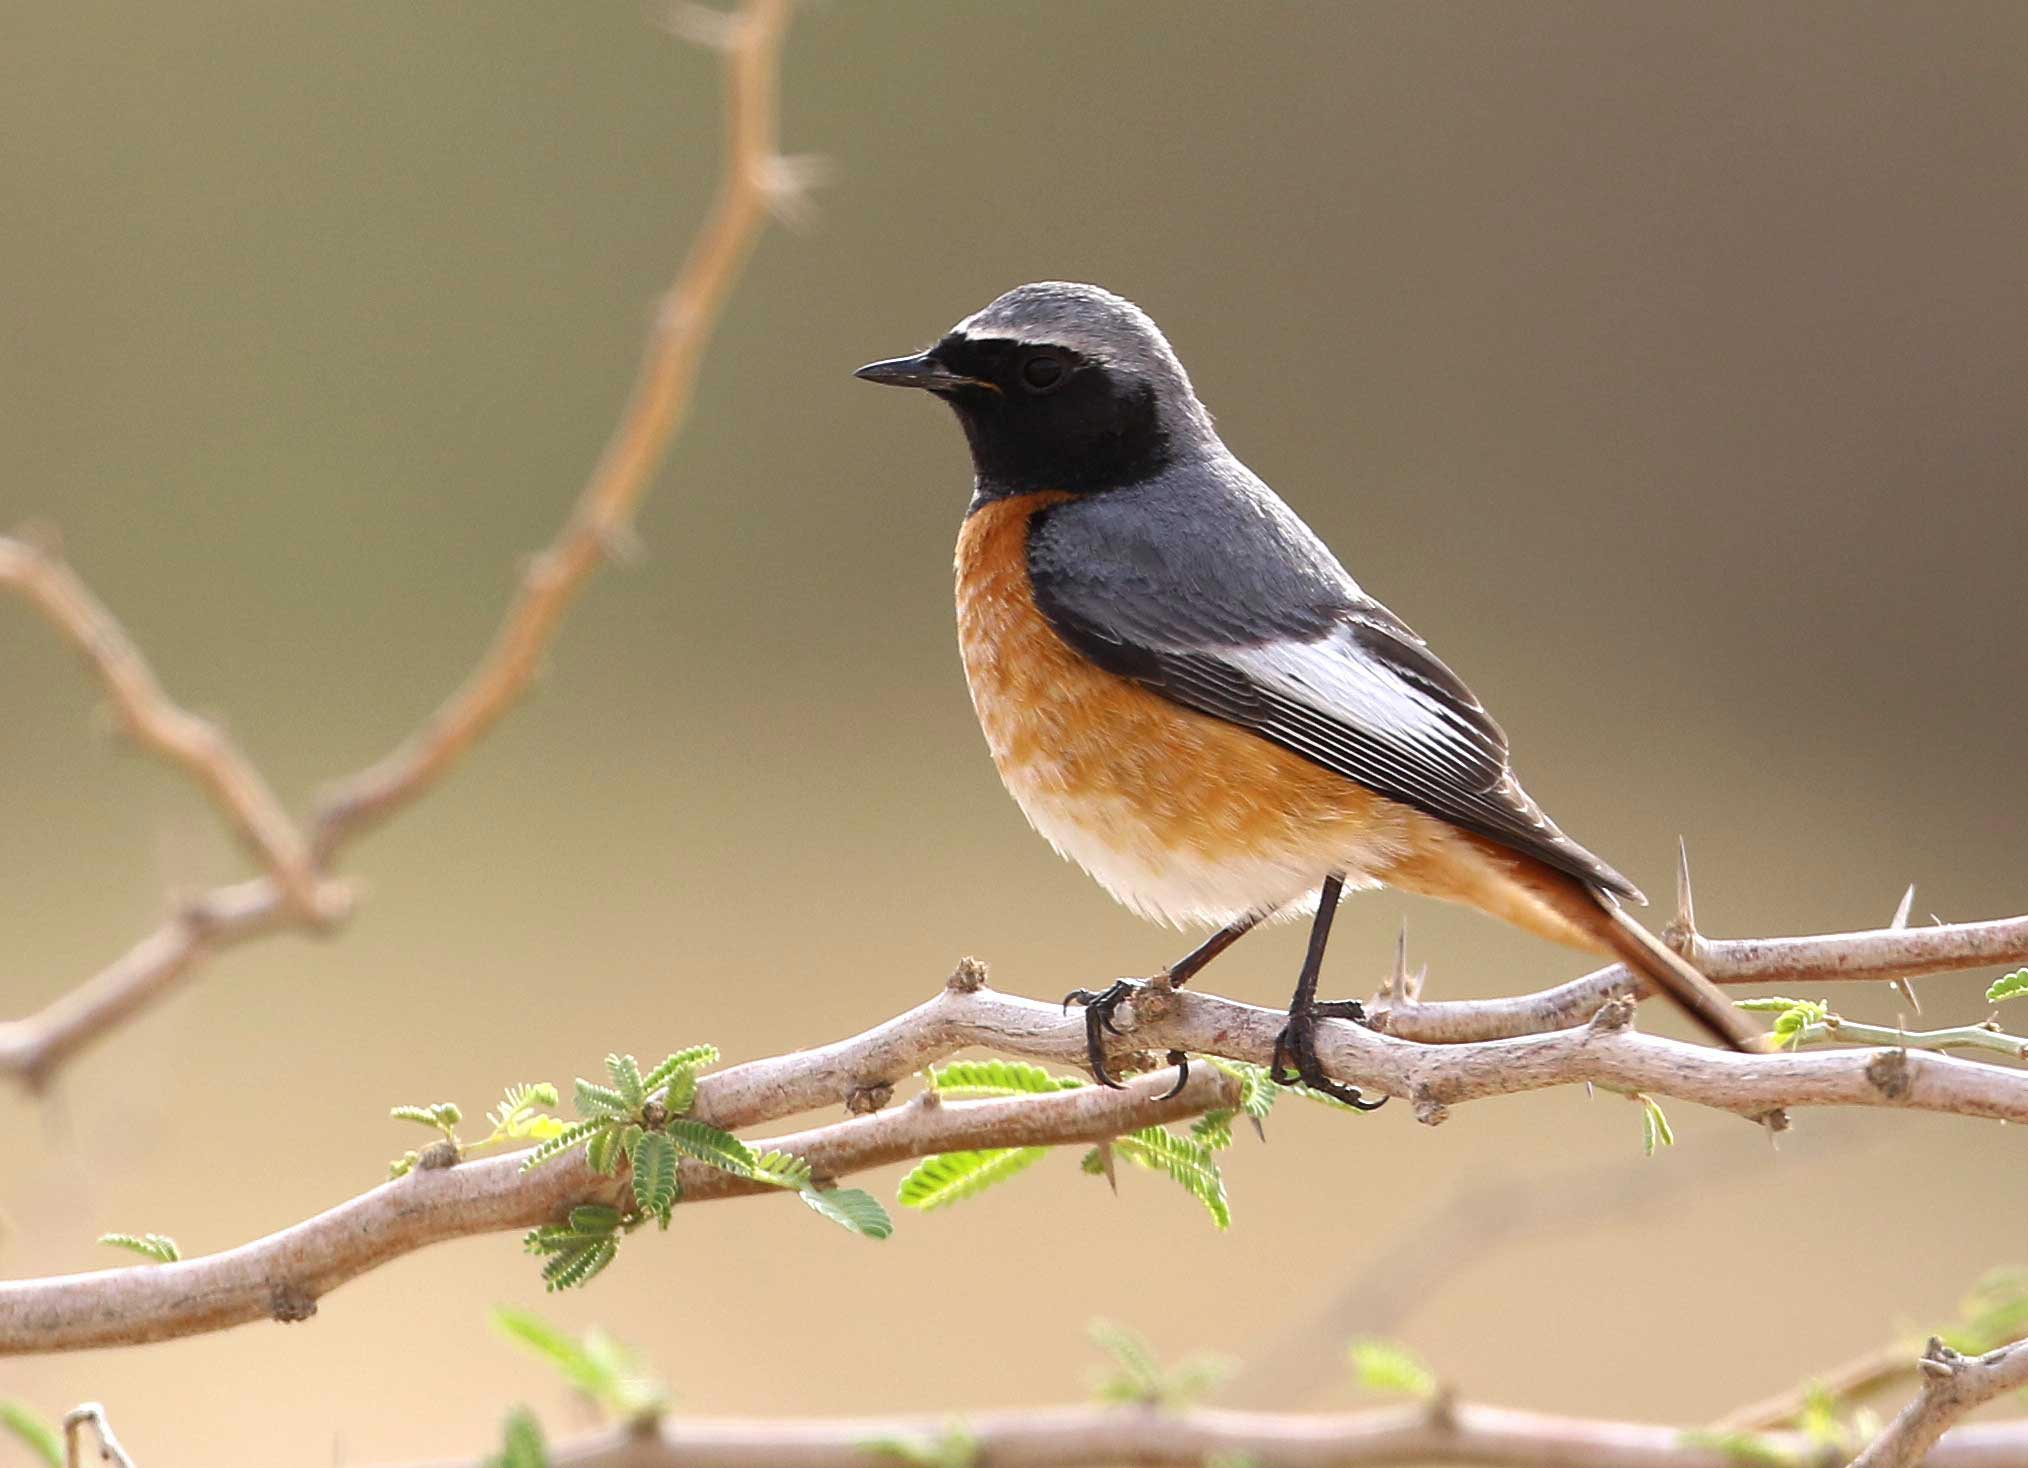 Ehrenberg's or Common Redstart perched on a branch of a tree